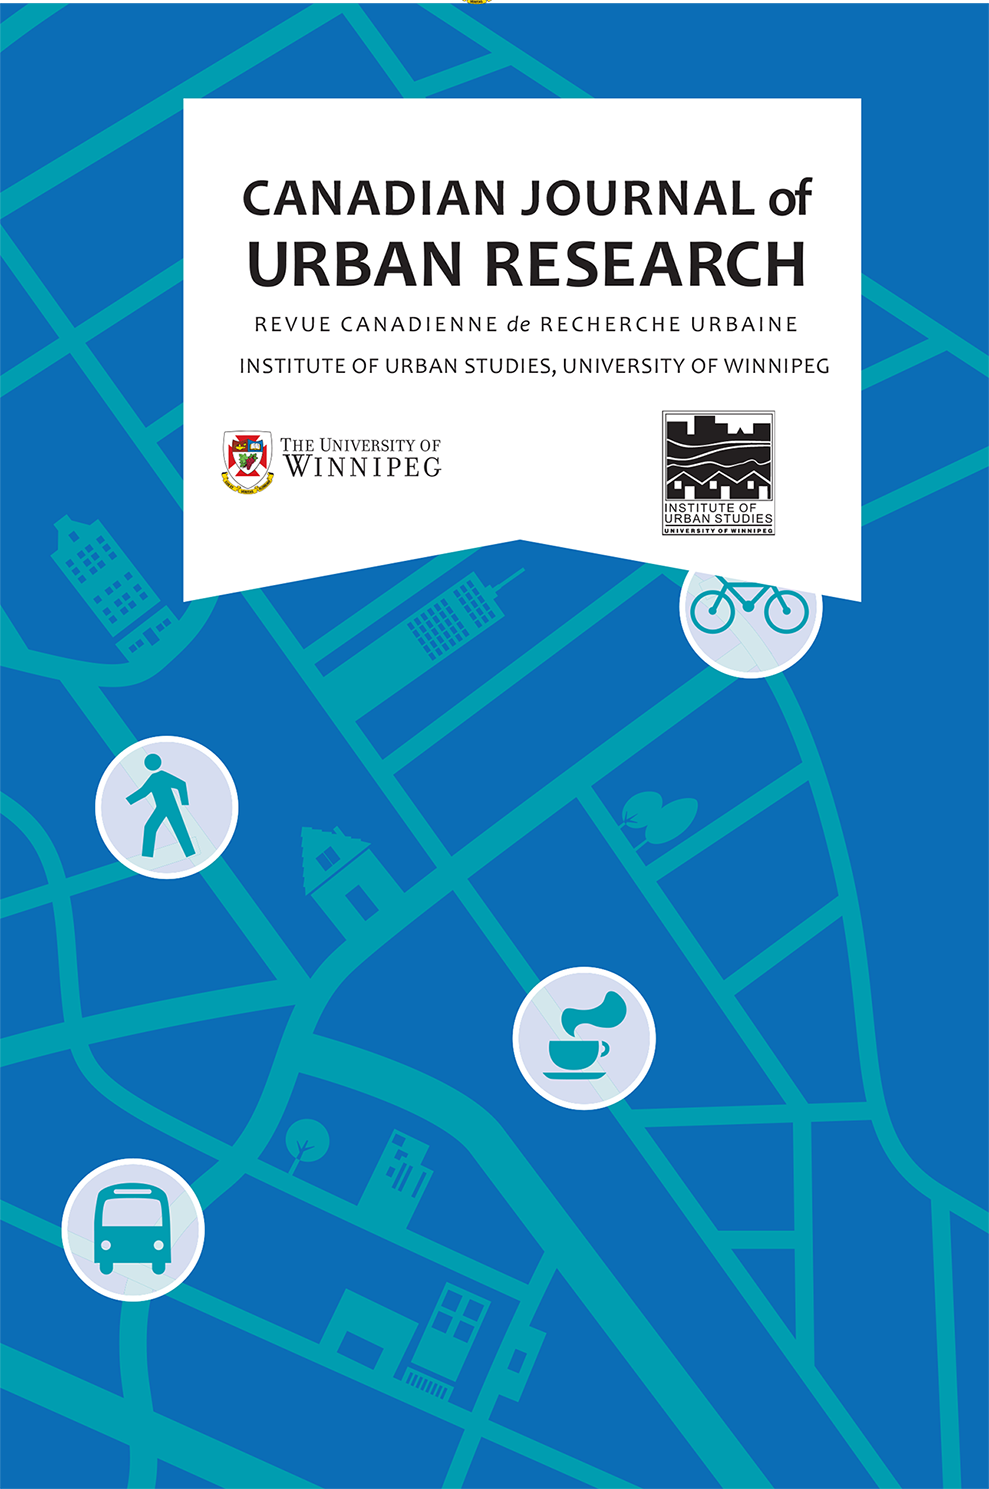 					View Vol. 28 No. 2 (2019): Canadian Journal of Urban Research - Winter 2019 Issue
				